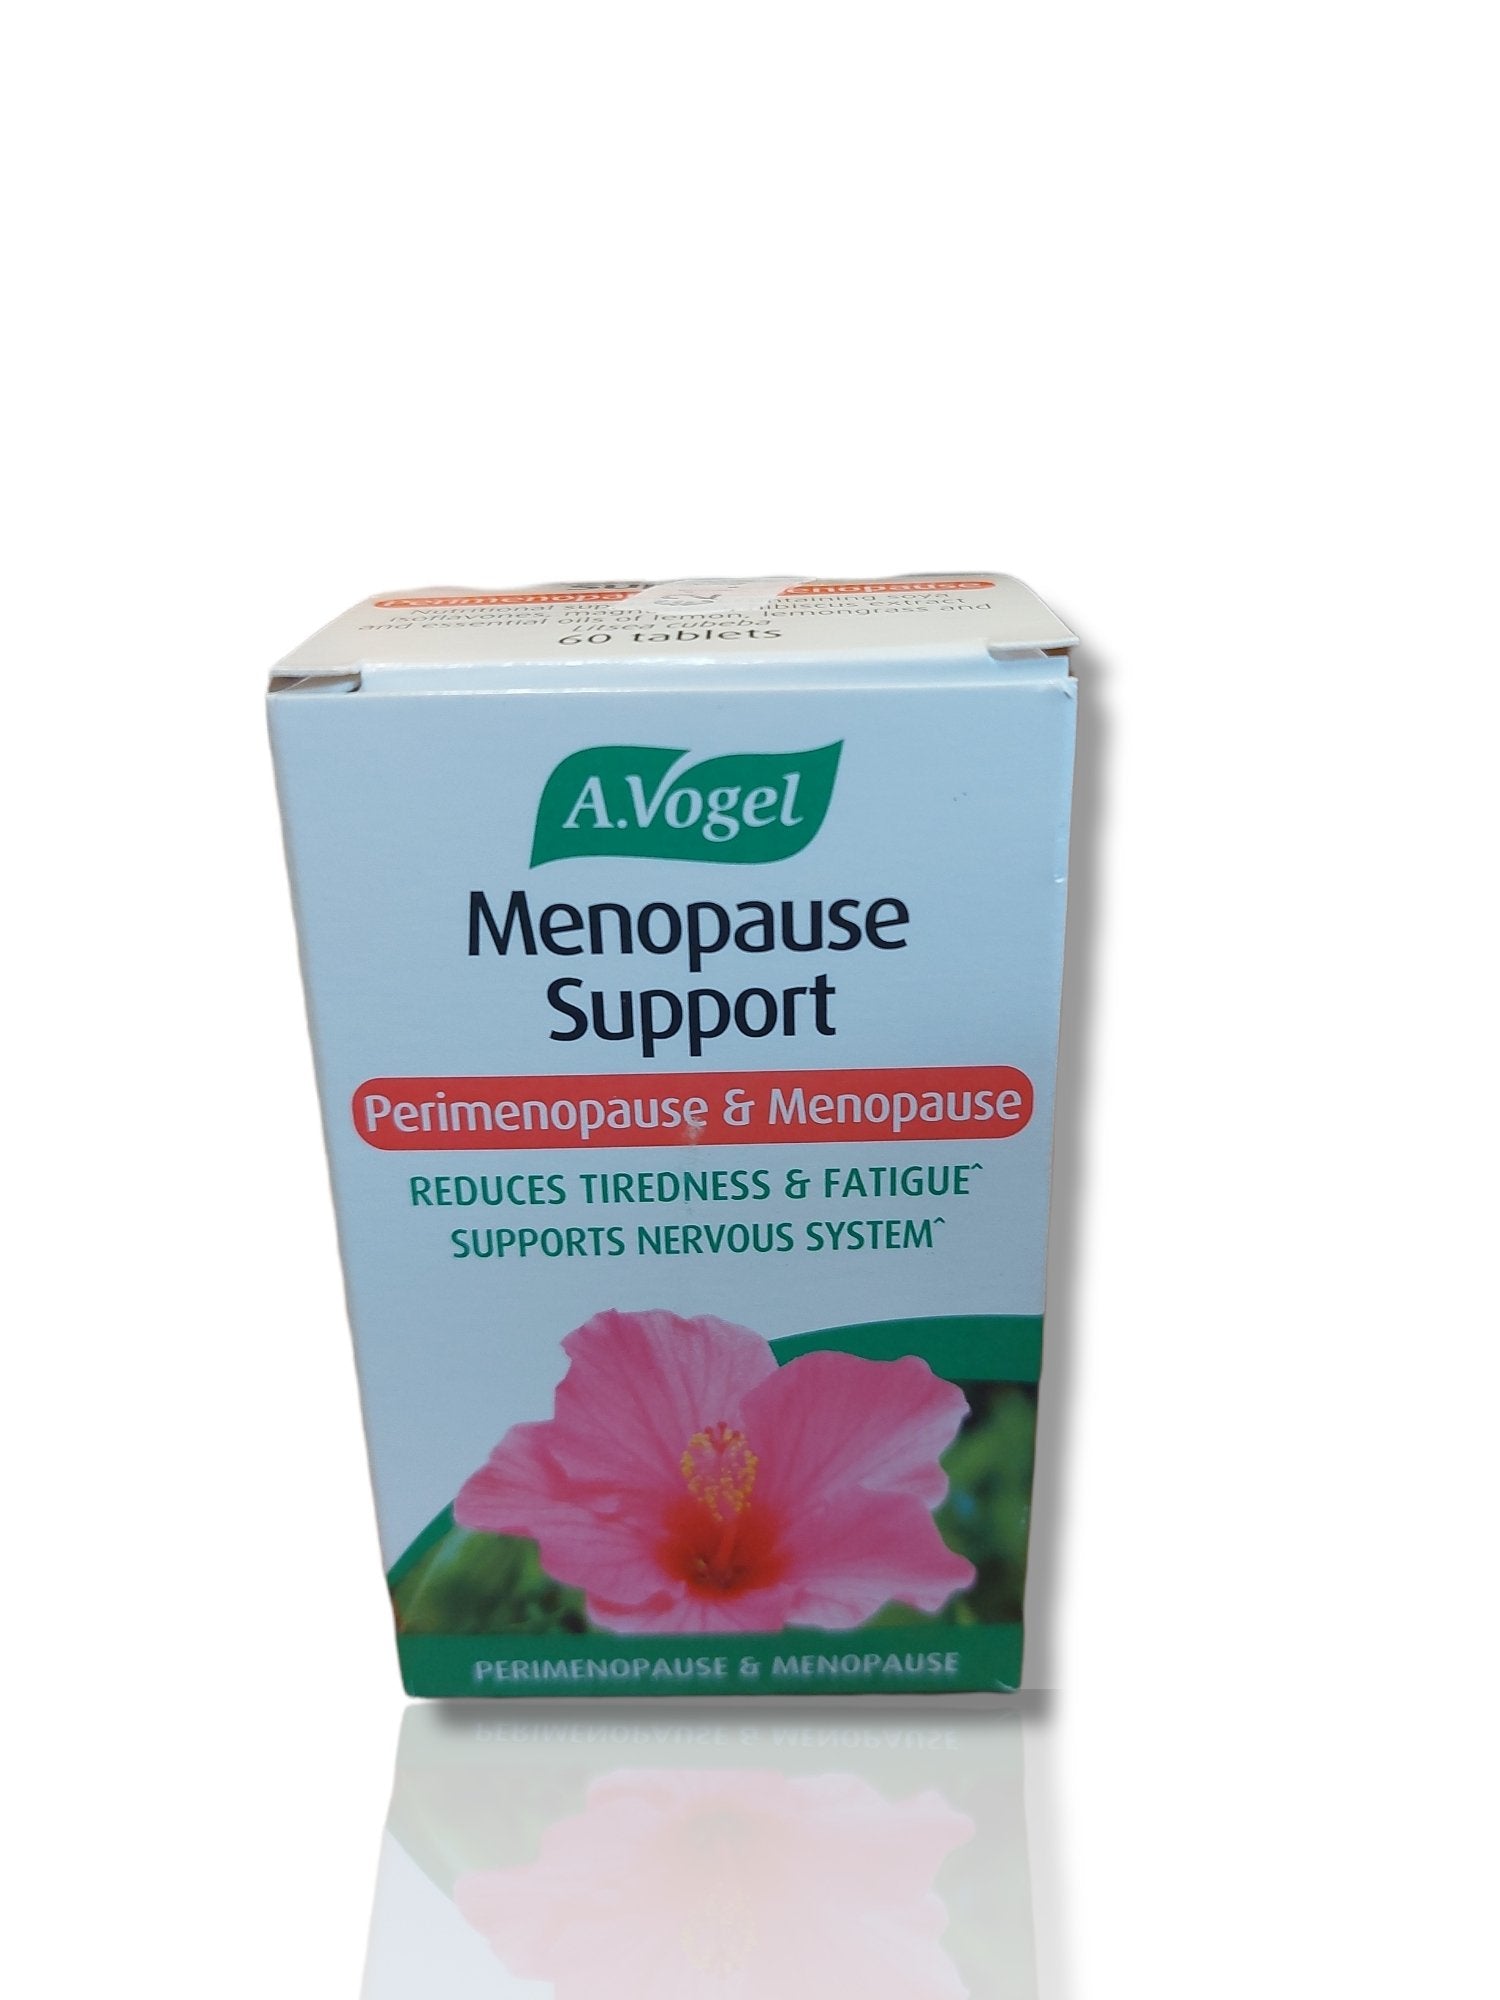 A.Vogel Menopause Support 60 cap - HealthyLiving.ie